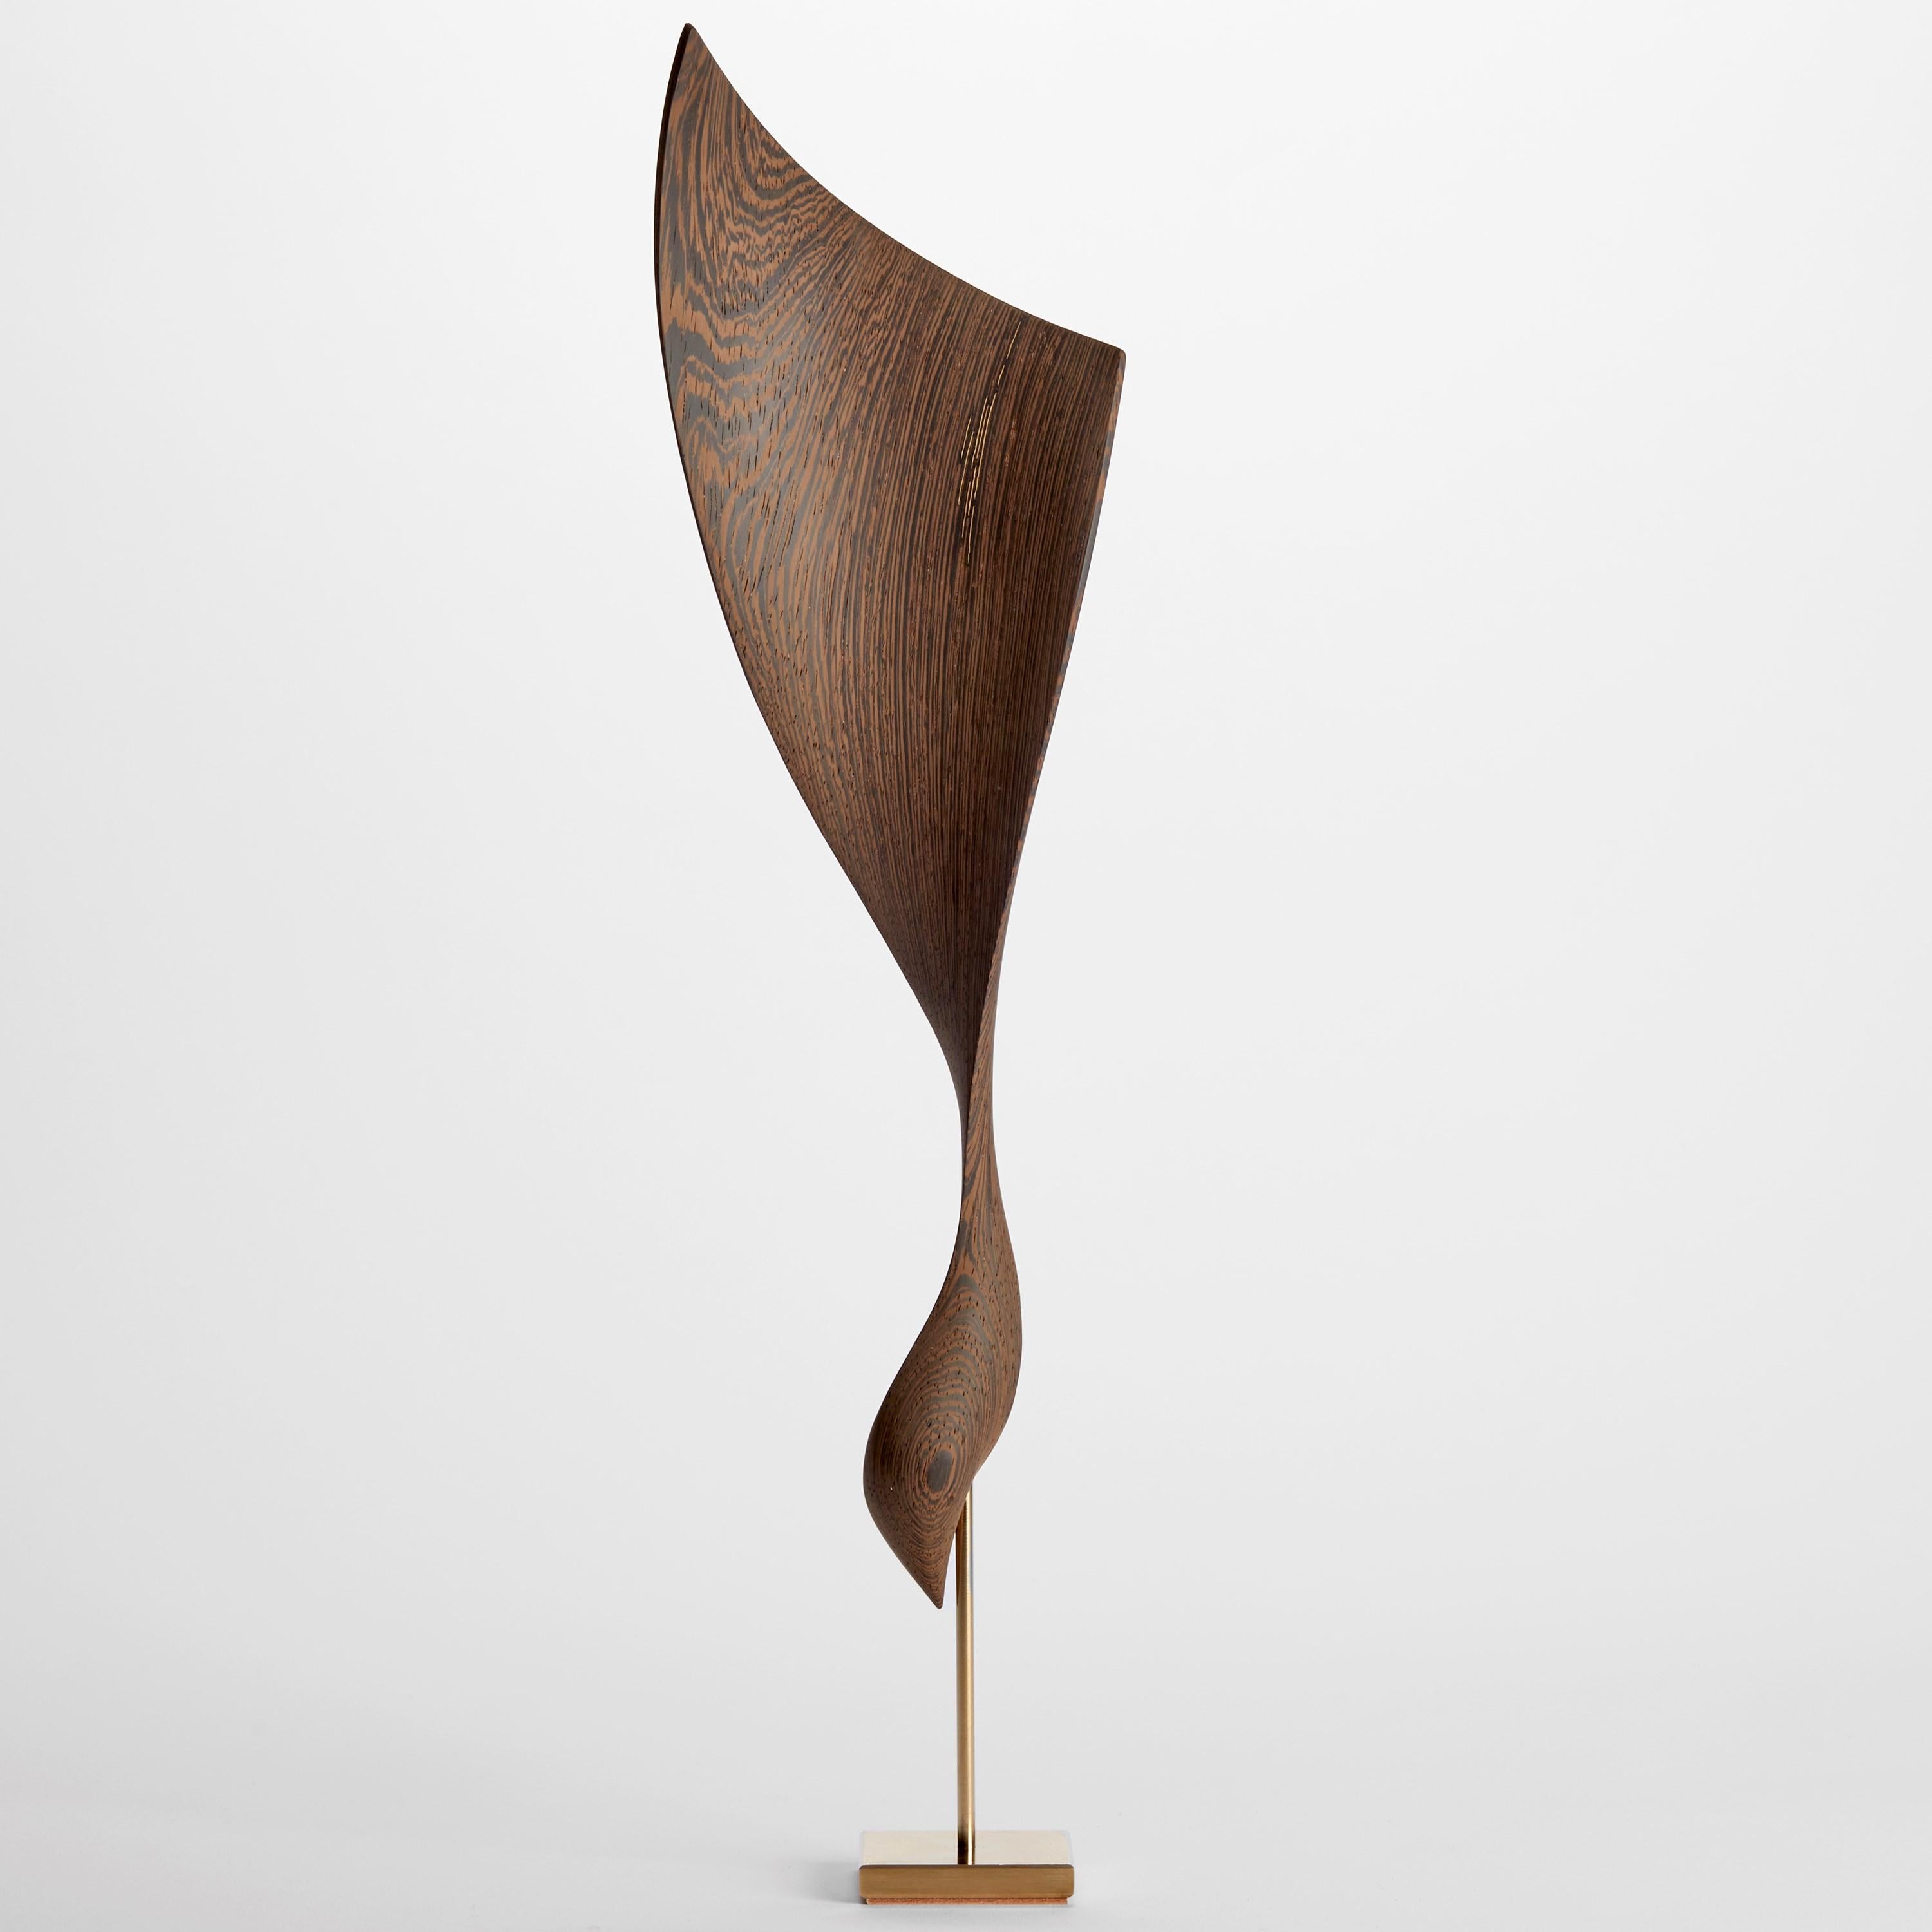 'Flow Petit No 21' is a unique artwork by the Danish artists, Egeværk. It is created from Wengé sourced from Africa - Congo and Cameroon - (wood, FSC* certified) with an inlay of 24ct fine gold and gold plated stainless steel foot. Signed on the